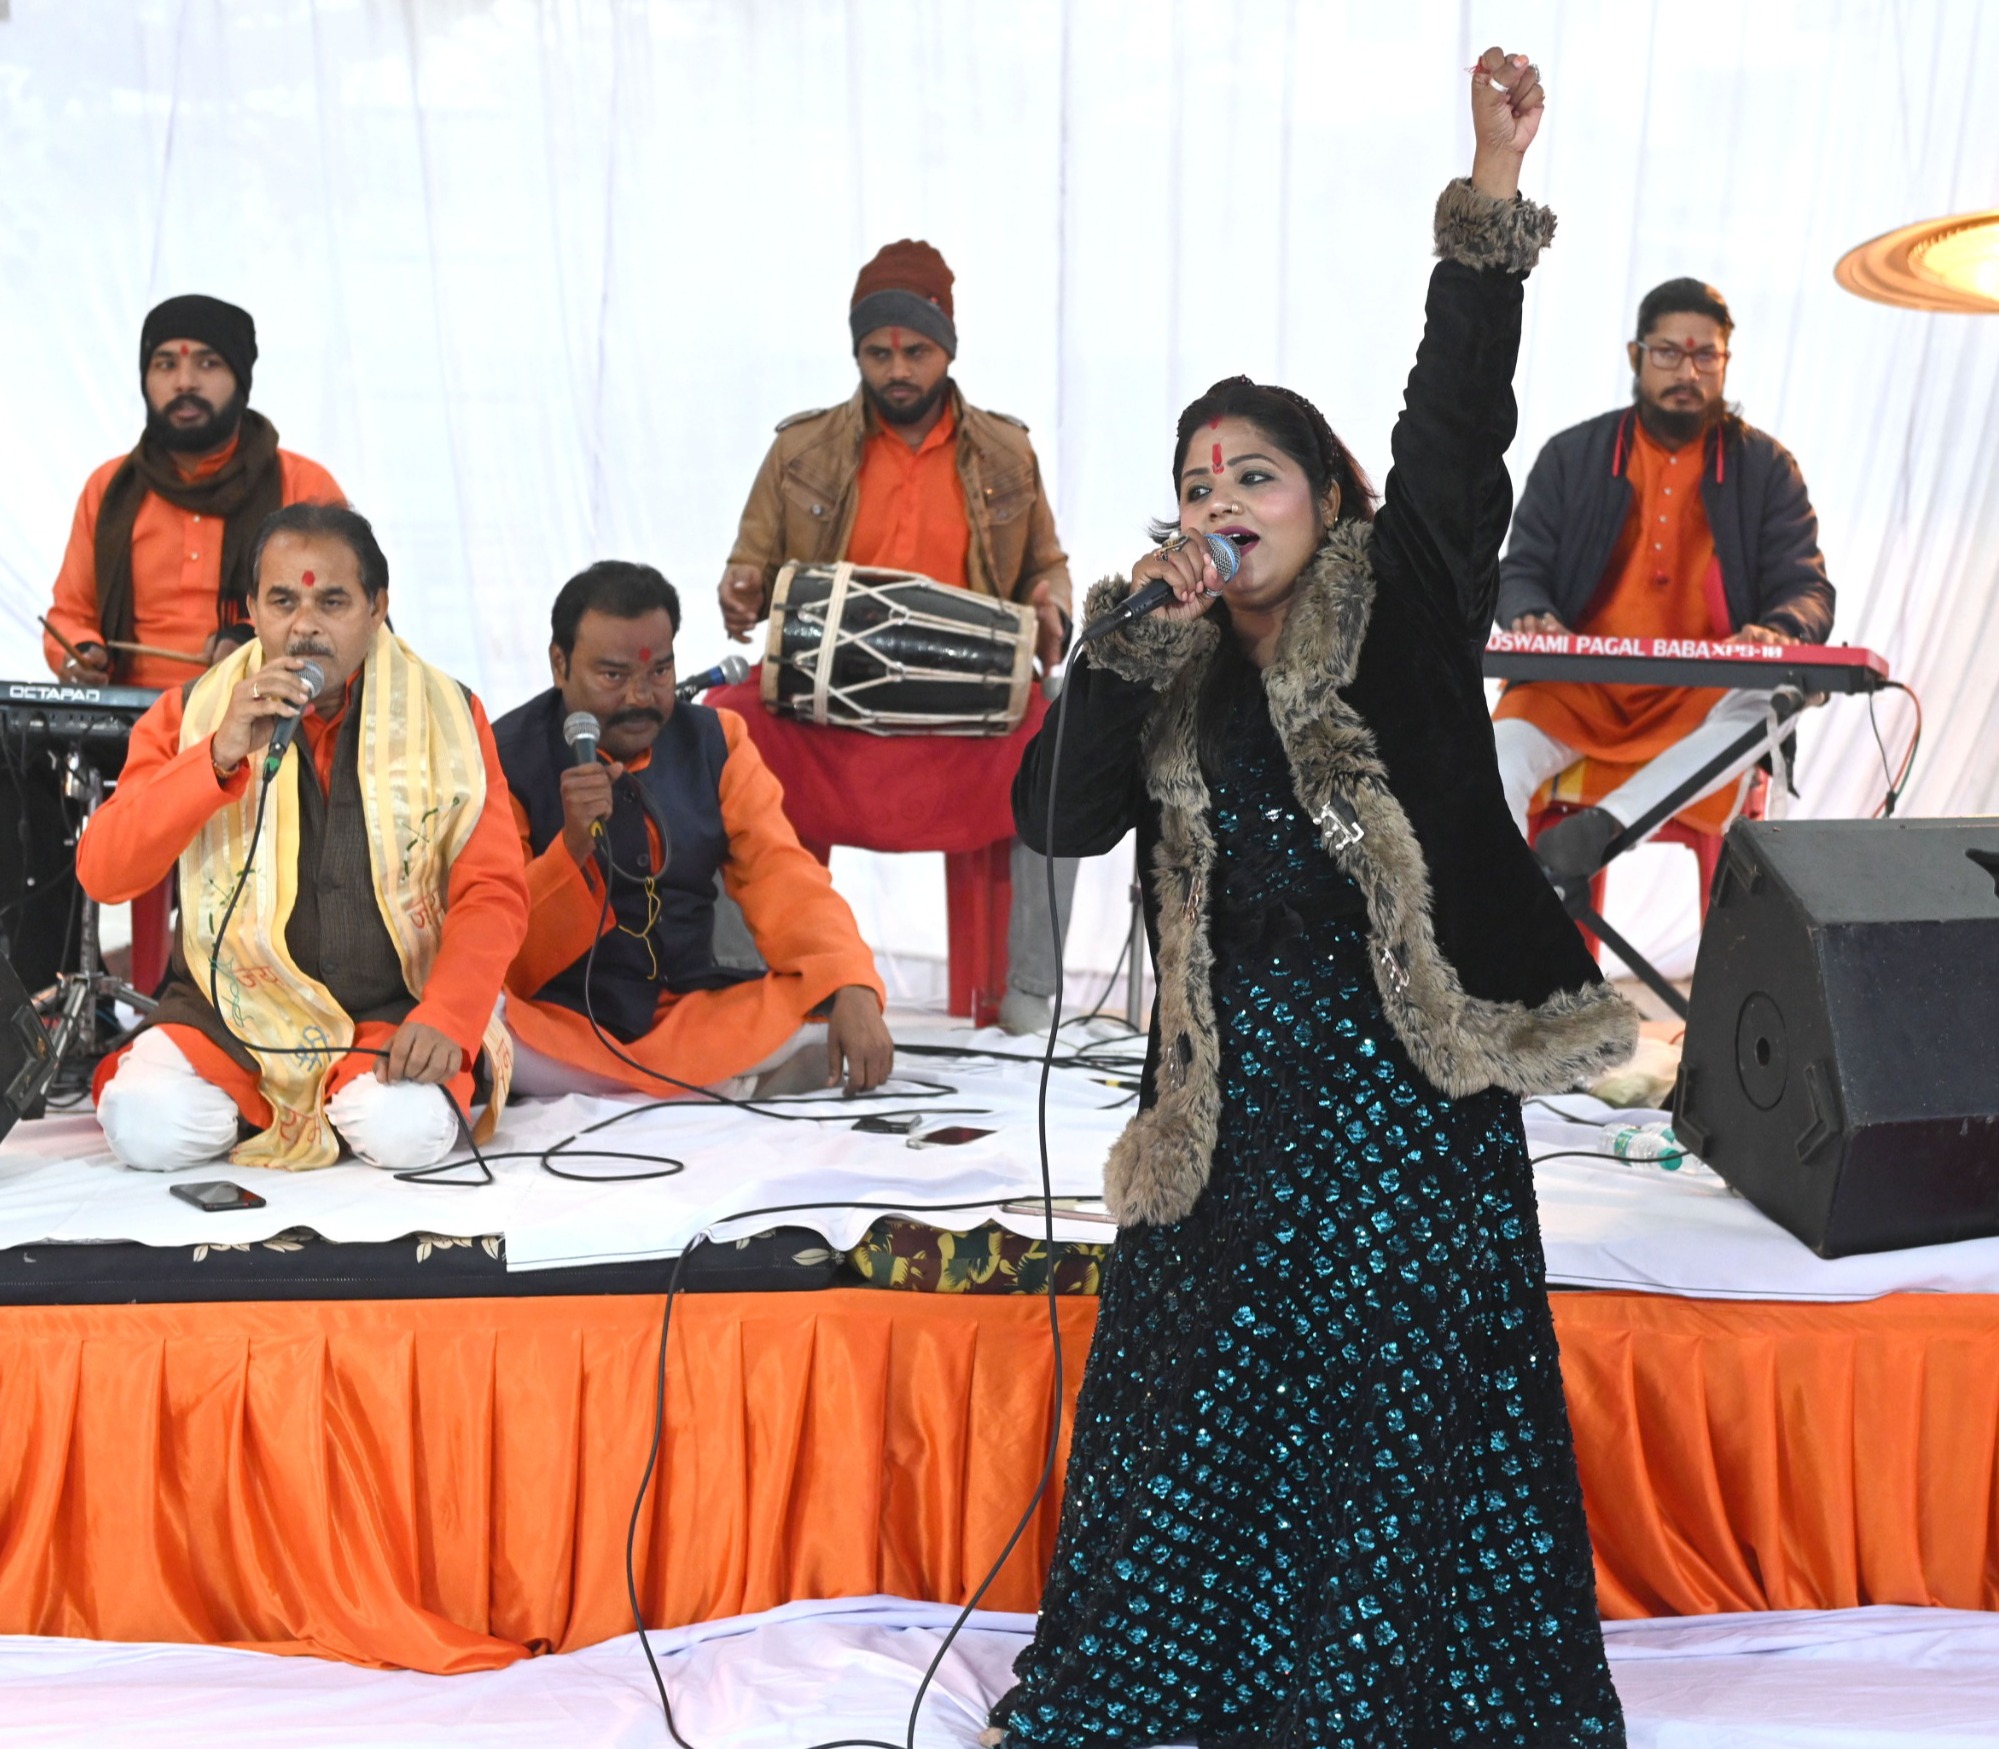 Bhajans and kirtans were performed in the temples located in the Raj Bhavan complex to commemorate the consecration of Lord Shri Ram in Ayodhya.